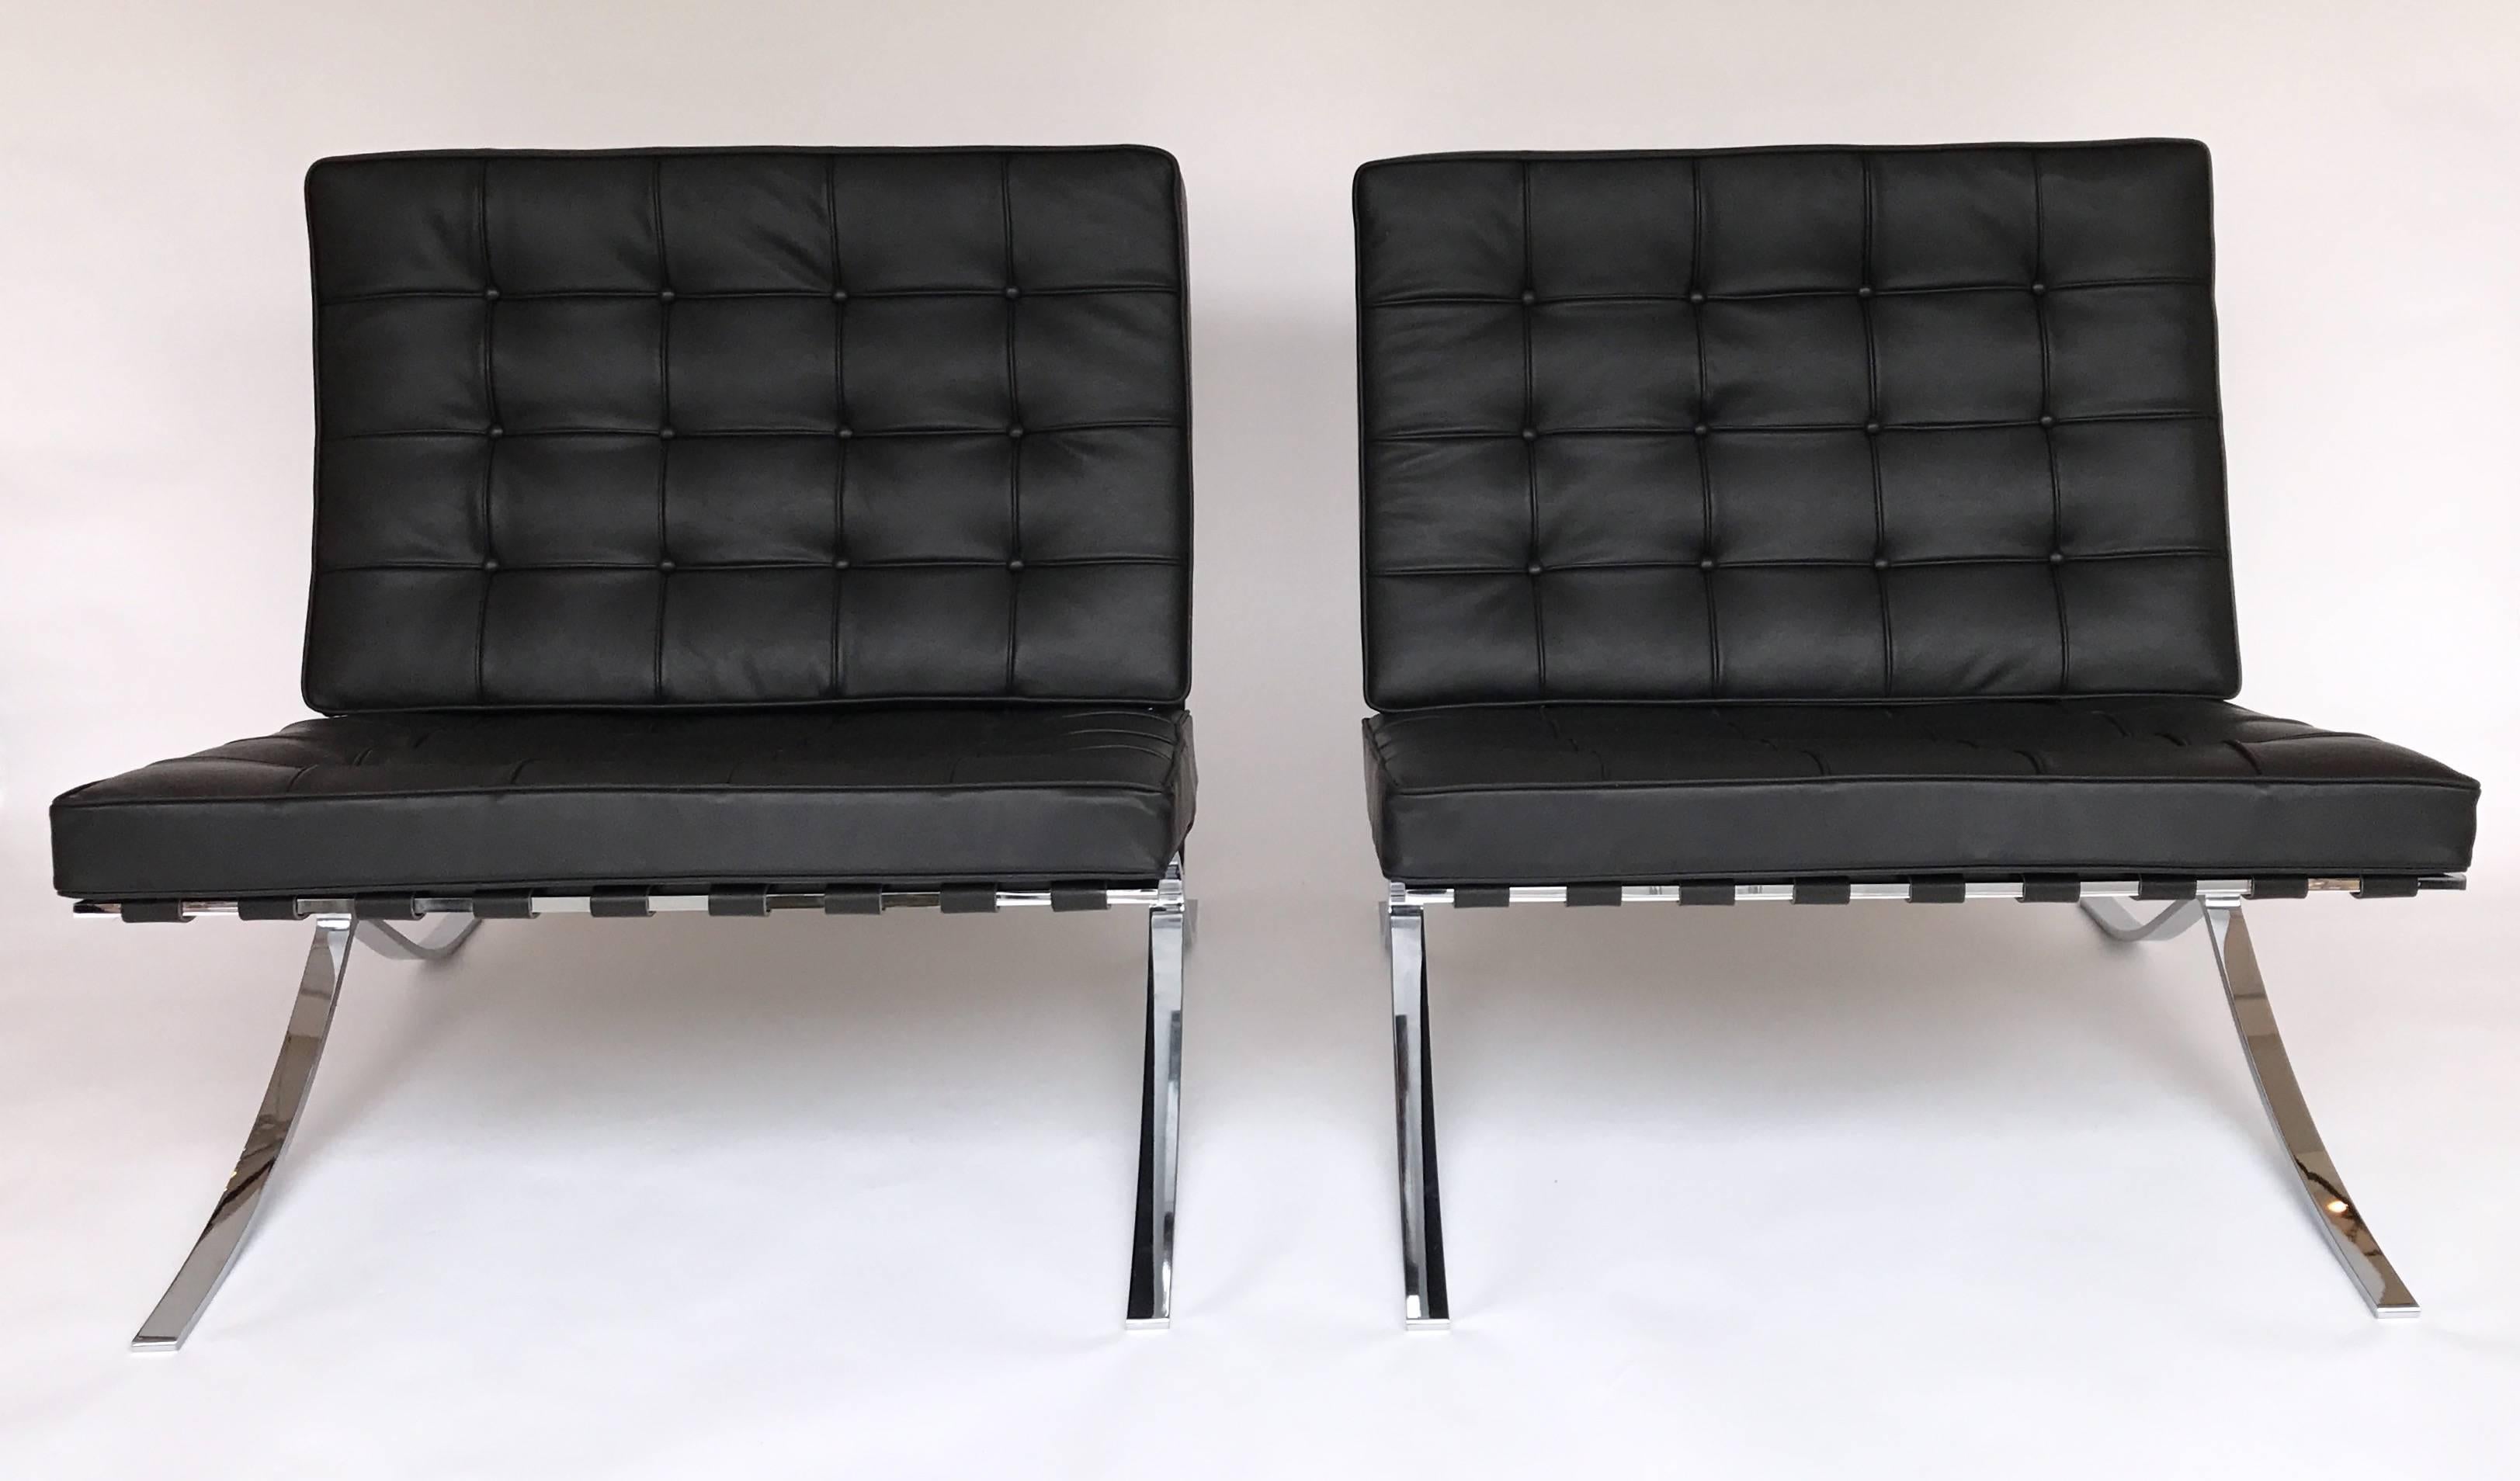 Pair of armchairs or lounge chairs model Barcelona in black leather by the designer Ludwig Mies van der Rohe for the editor Knoll. Iconic chair of the 20th century design. Engraved in metal Knoll Studio signature of Mies Van der Rohe. Excellent